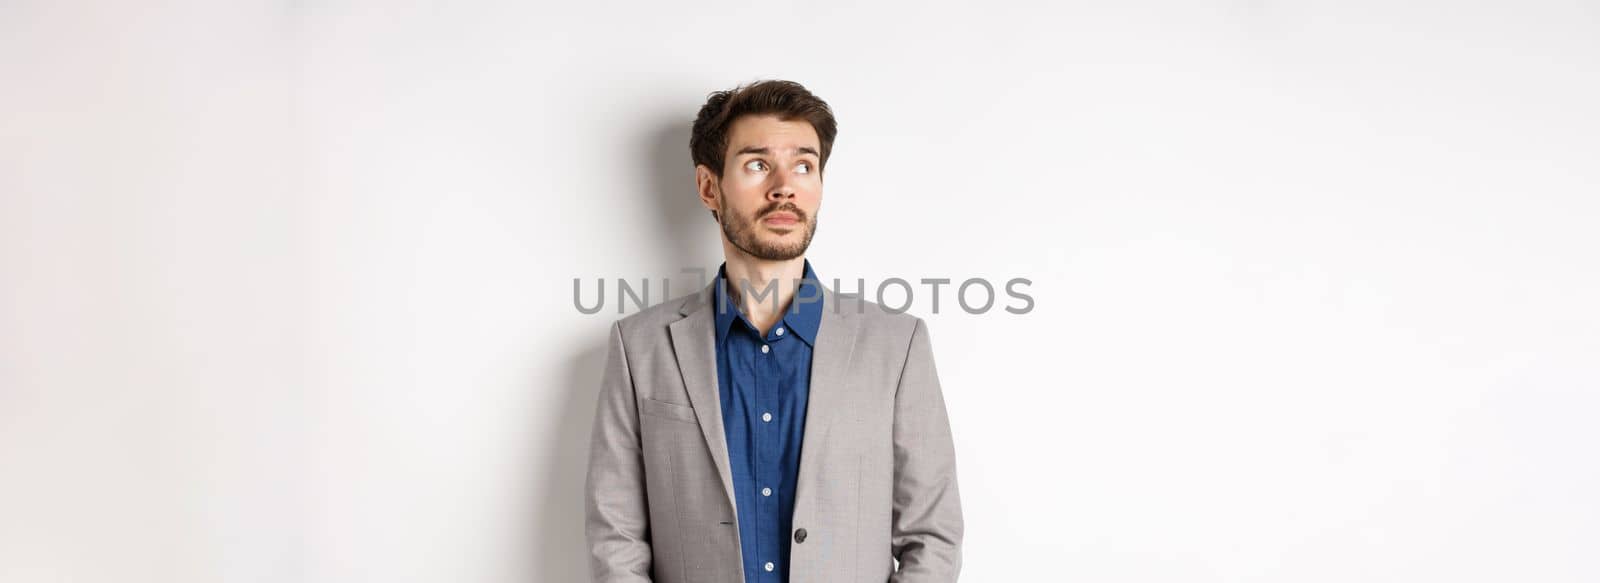 Thoughtful sad businessman in suit looking at upper left corner logo, thinking or spacing out, standing on white background.